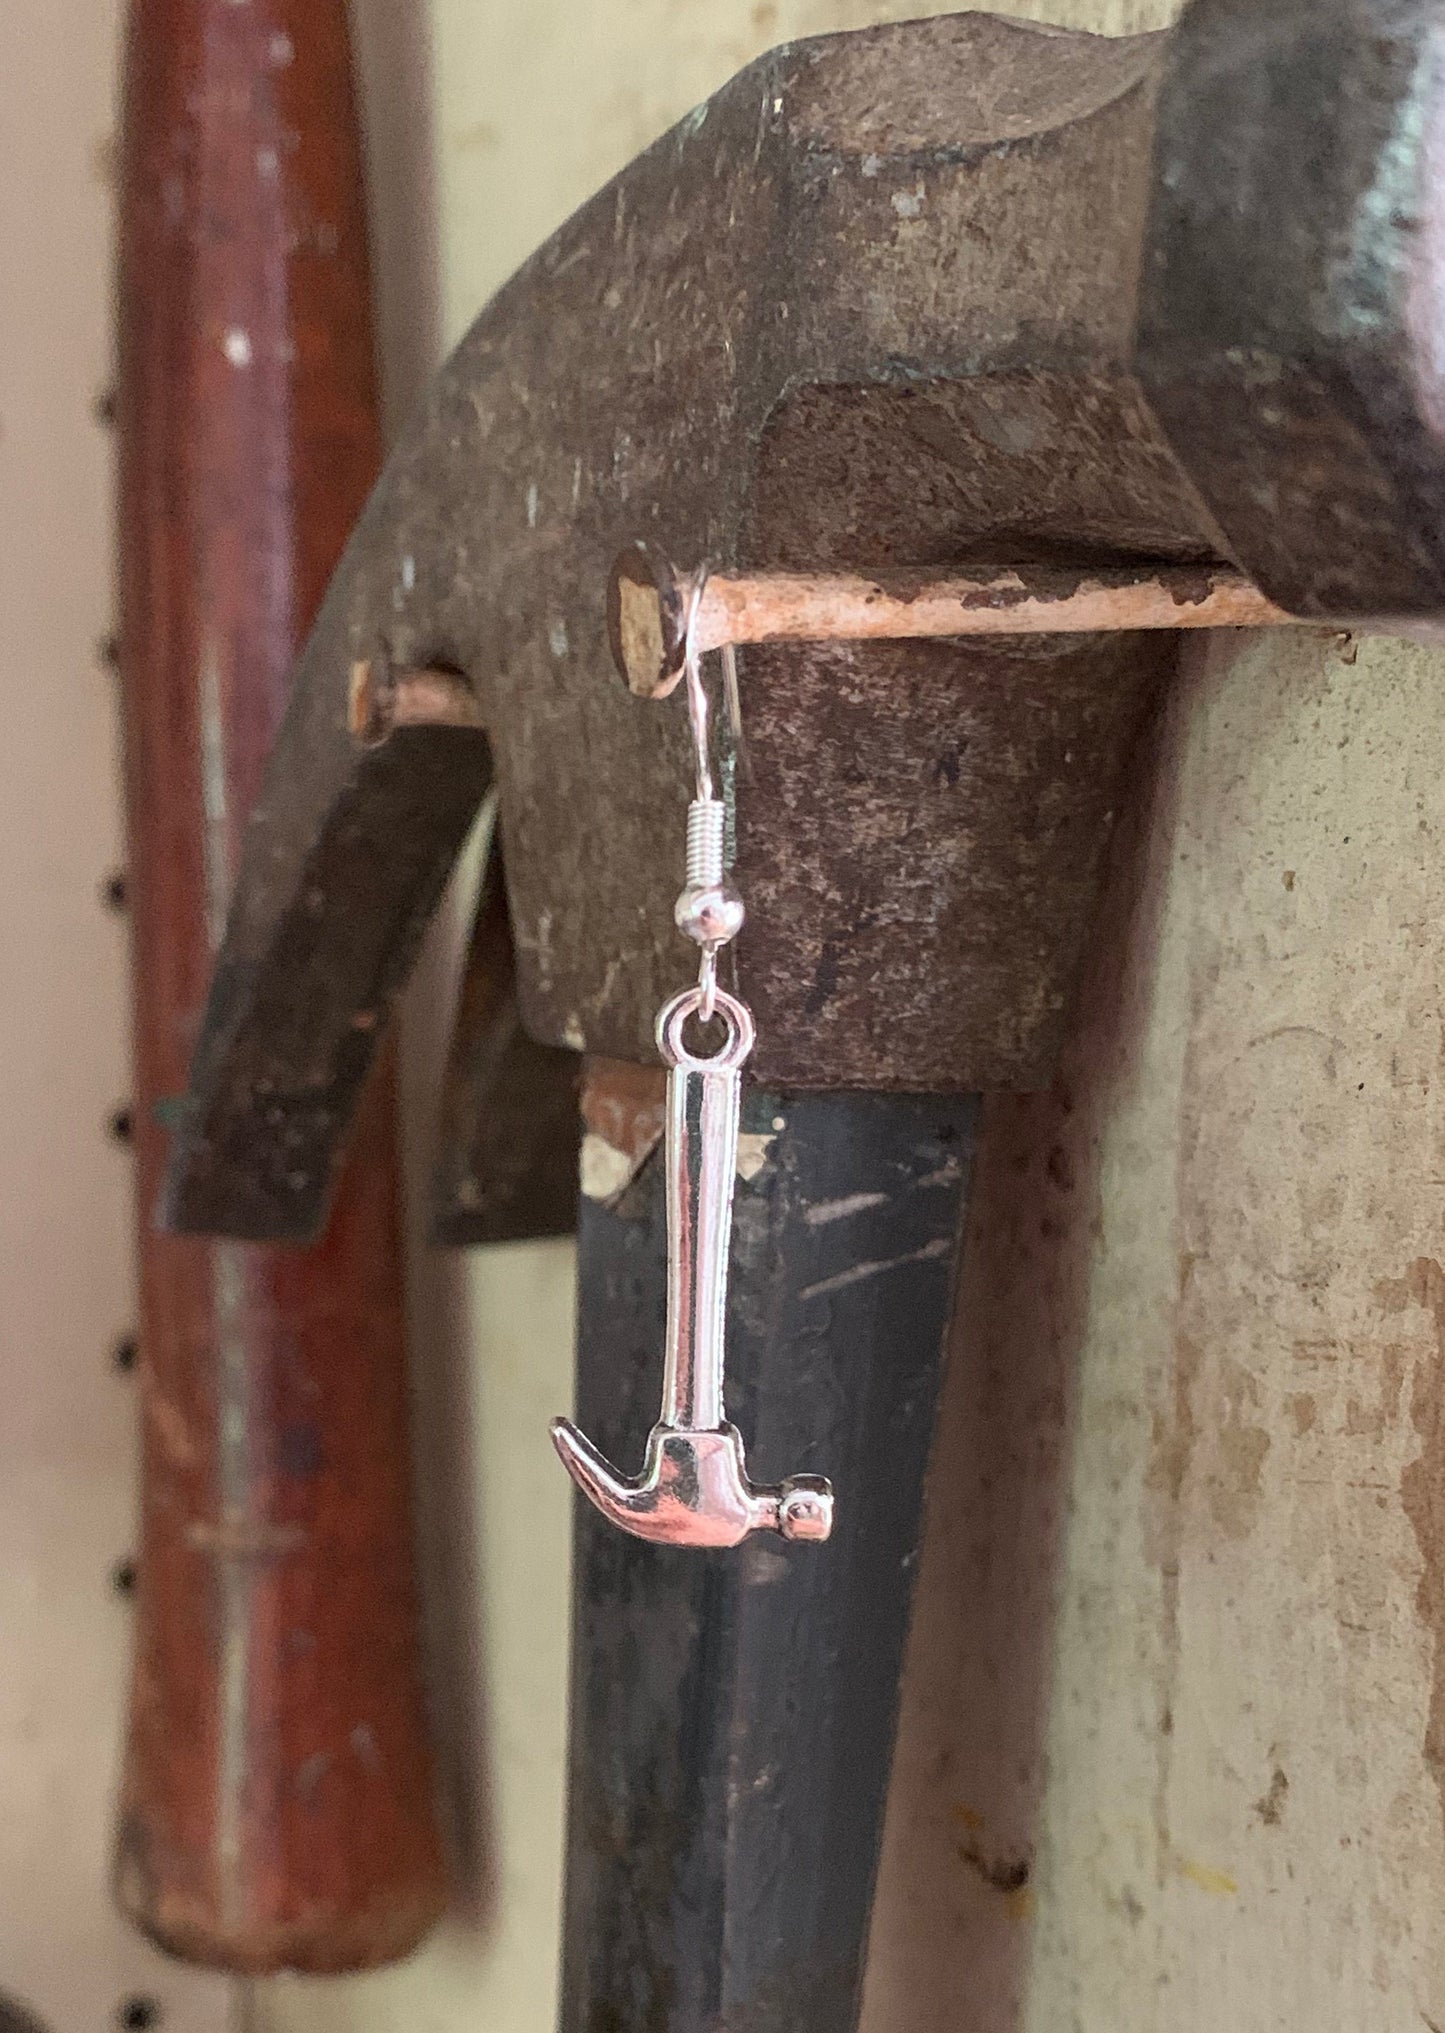 hammer earring hanging on a nail in front of an actual hammer